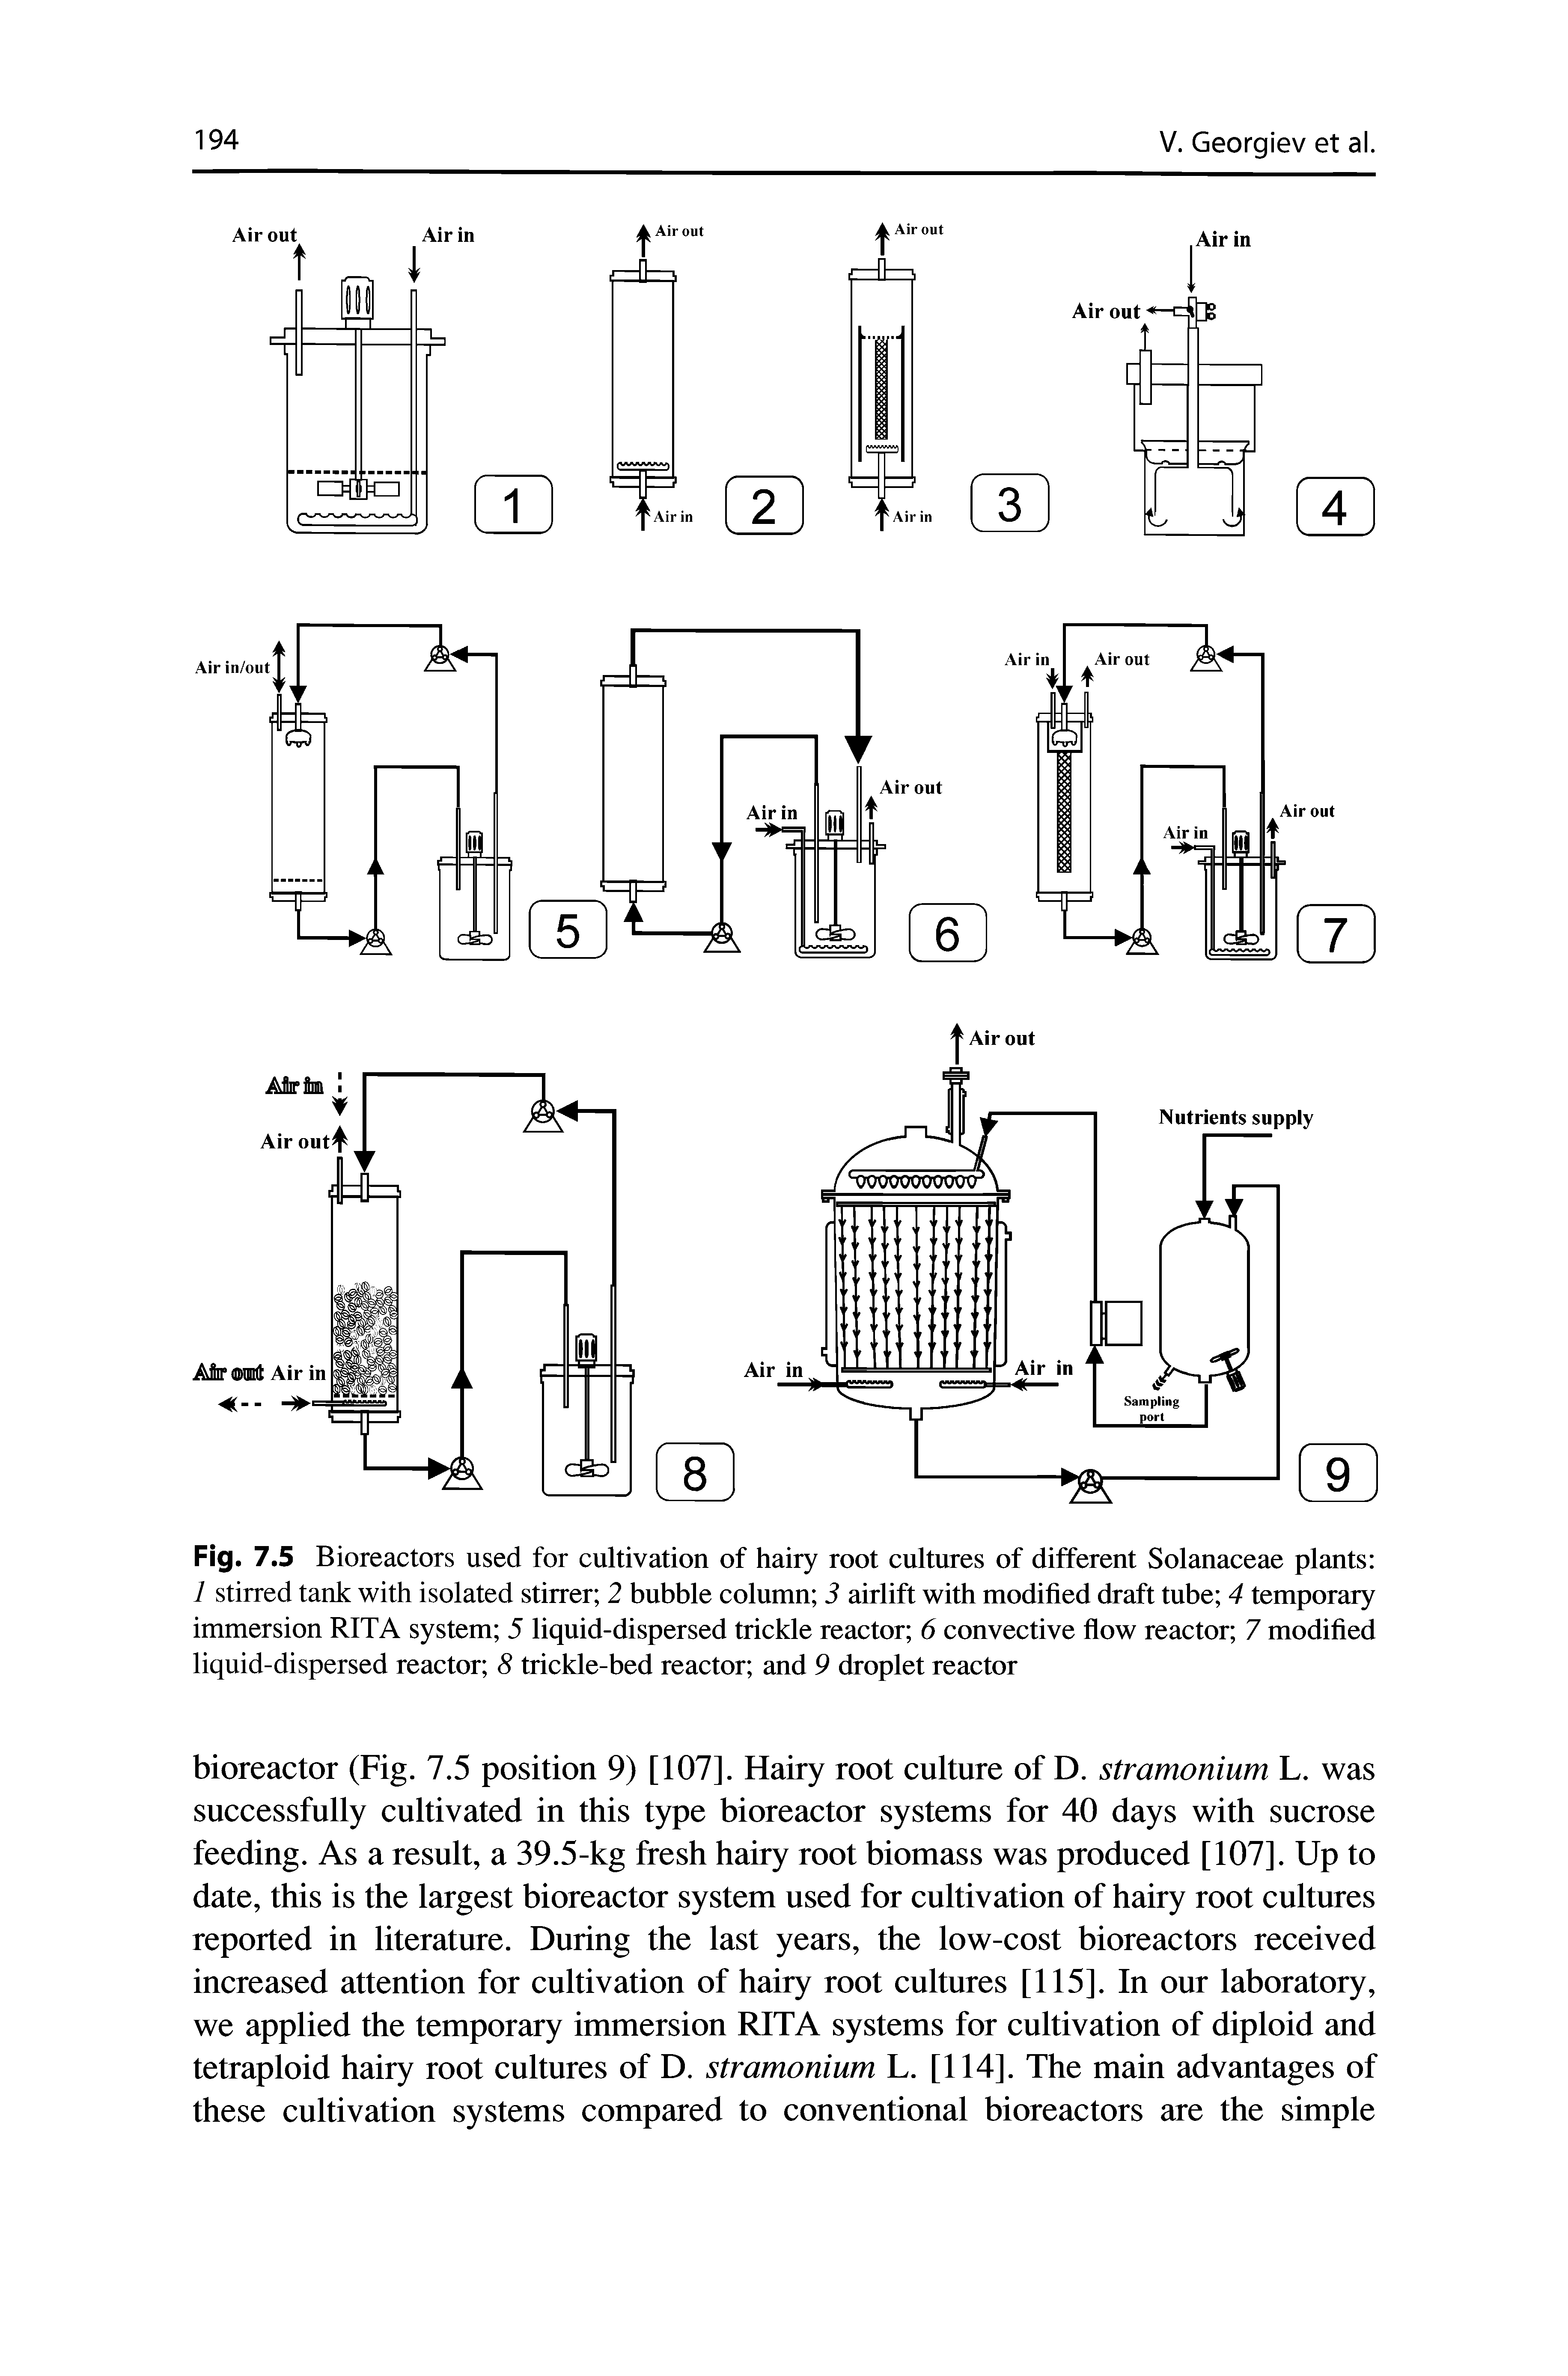 Fig. 7.5 Bioreactors used for cultivation of hairy root cultures of different Solanaceae plants 1 stirred tank with isolated stirrer 2 bubble column 3 airlift with modified draft tube 4 temporary immersion RITA system 5 liquid-dispersed trickle reactor 6 convective flow reactor 7 modified liquid-dispersed reactor 8 trickle-bed reactor cuid 9 droplet reactor...